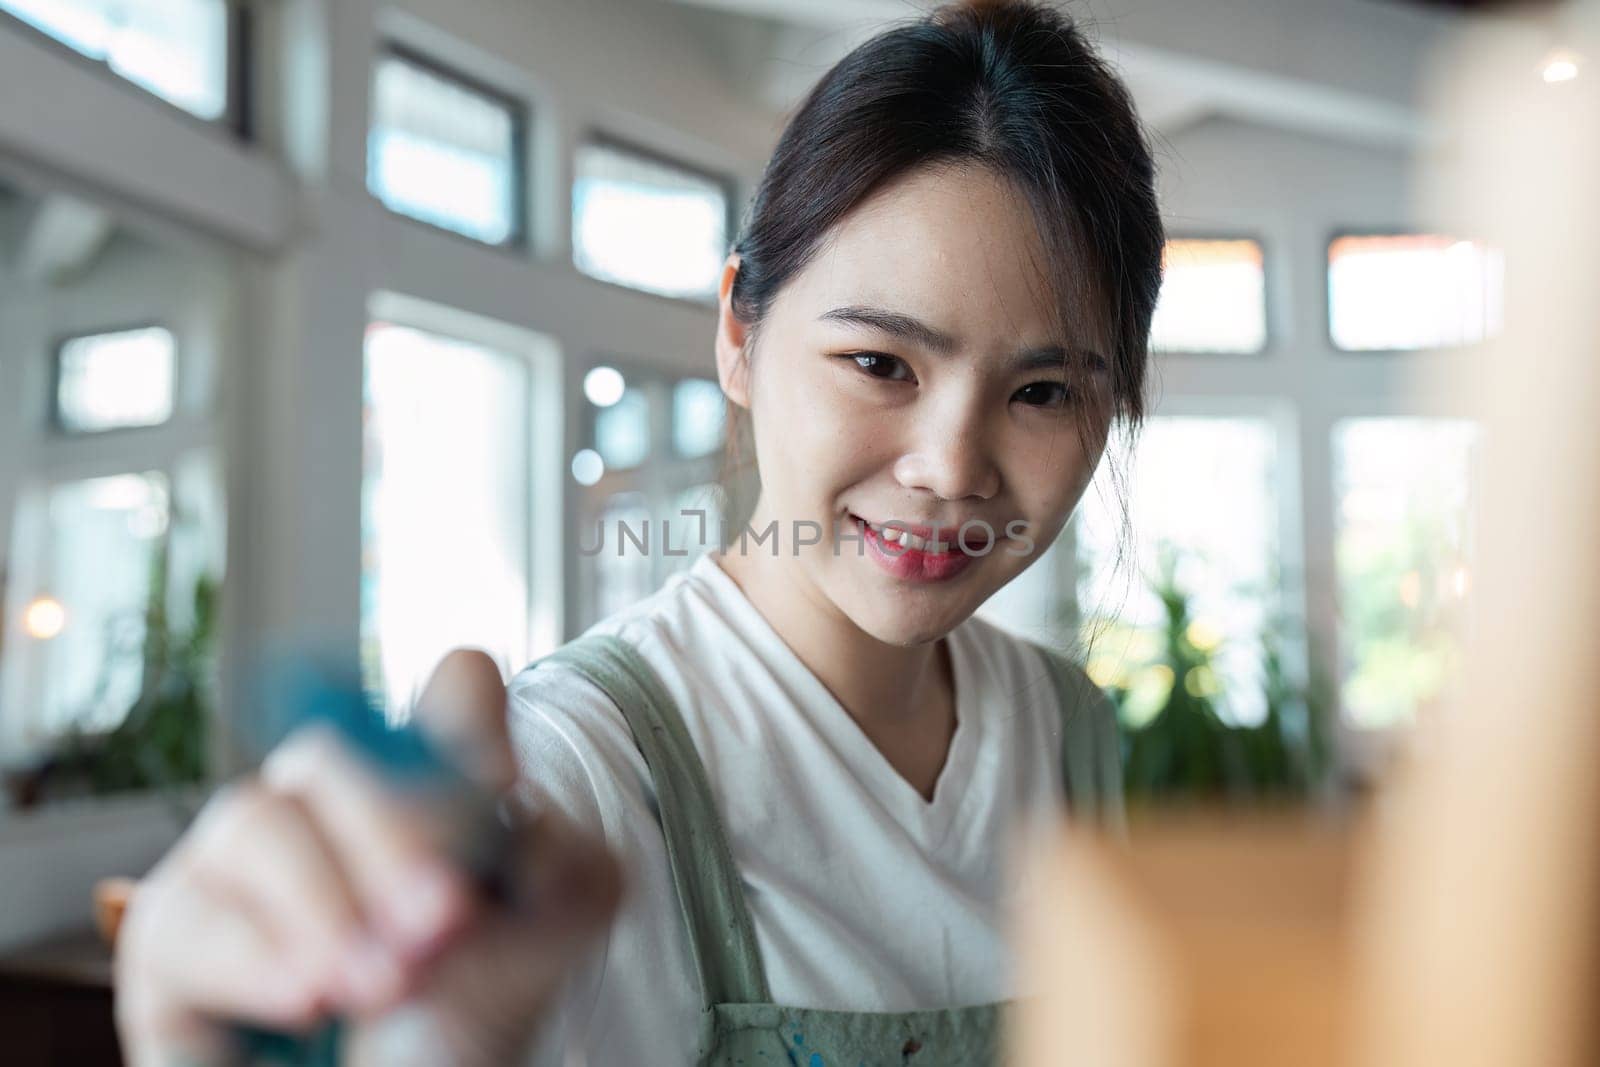 A young woman happily engaged in a creative hobby indoors, showcasing the joy of personal leisure activities in a bright and airy room.